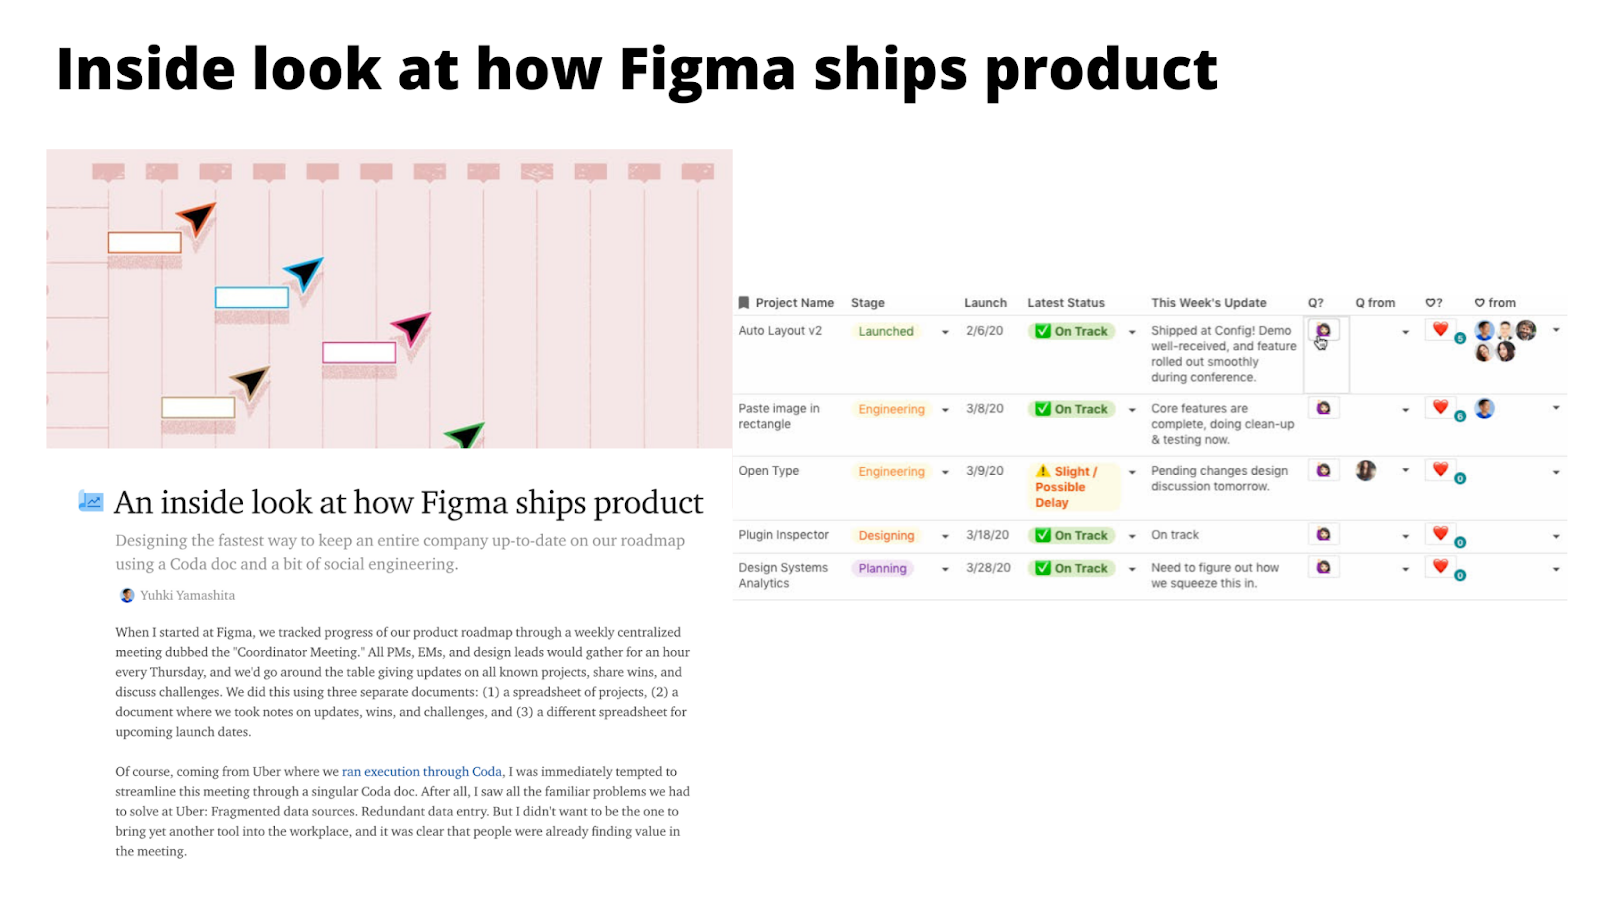 An inside look at how Figma ships product.